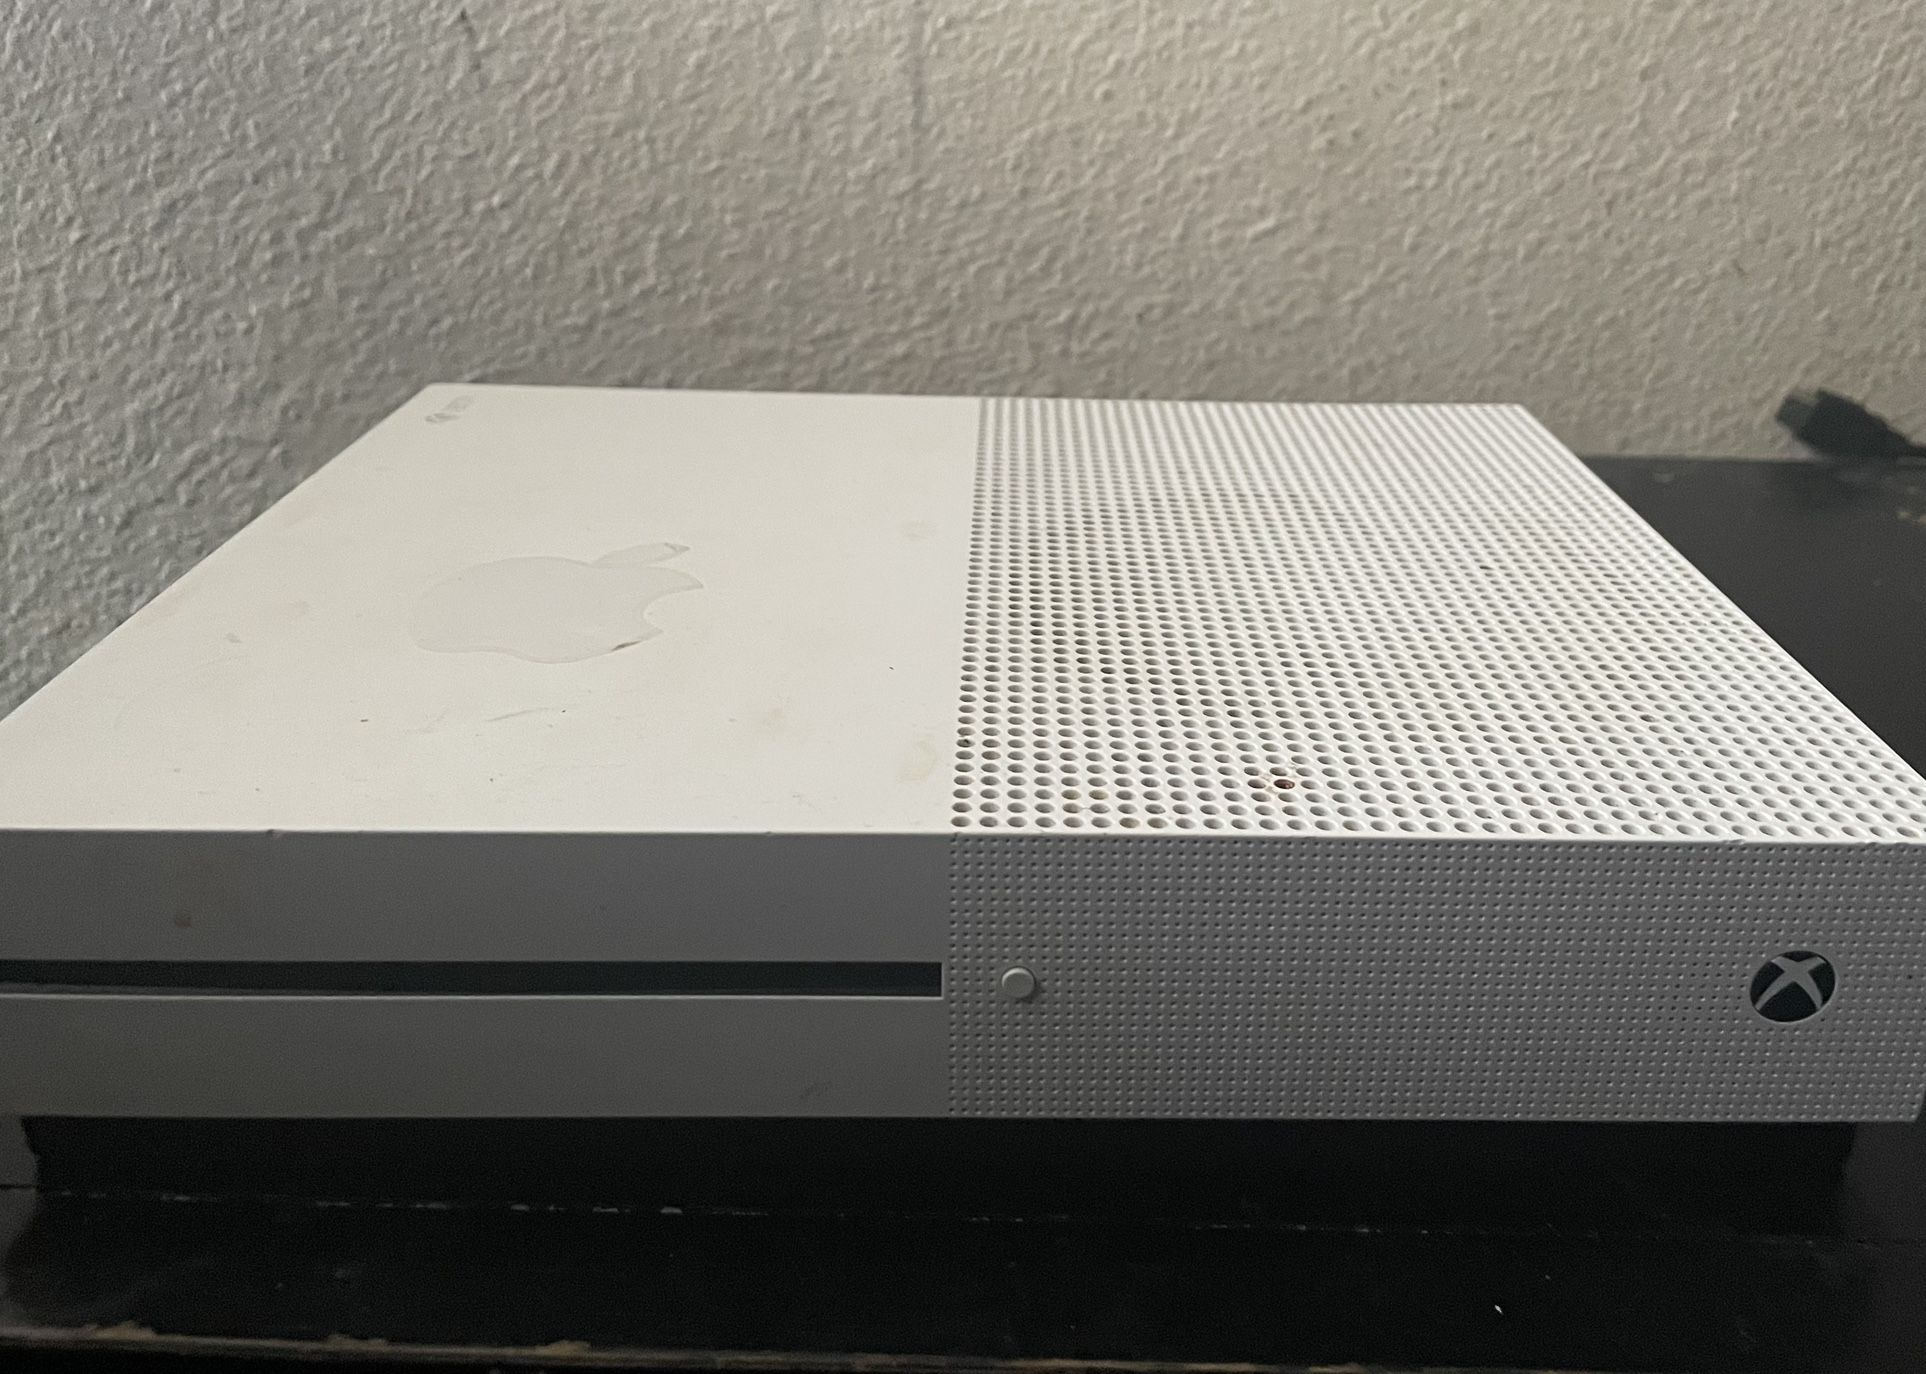 Used xbox one s (no problems) 